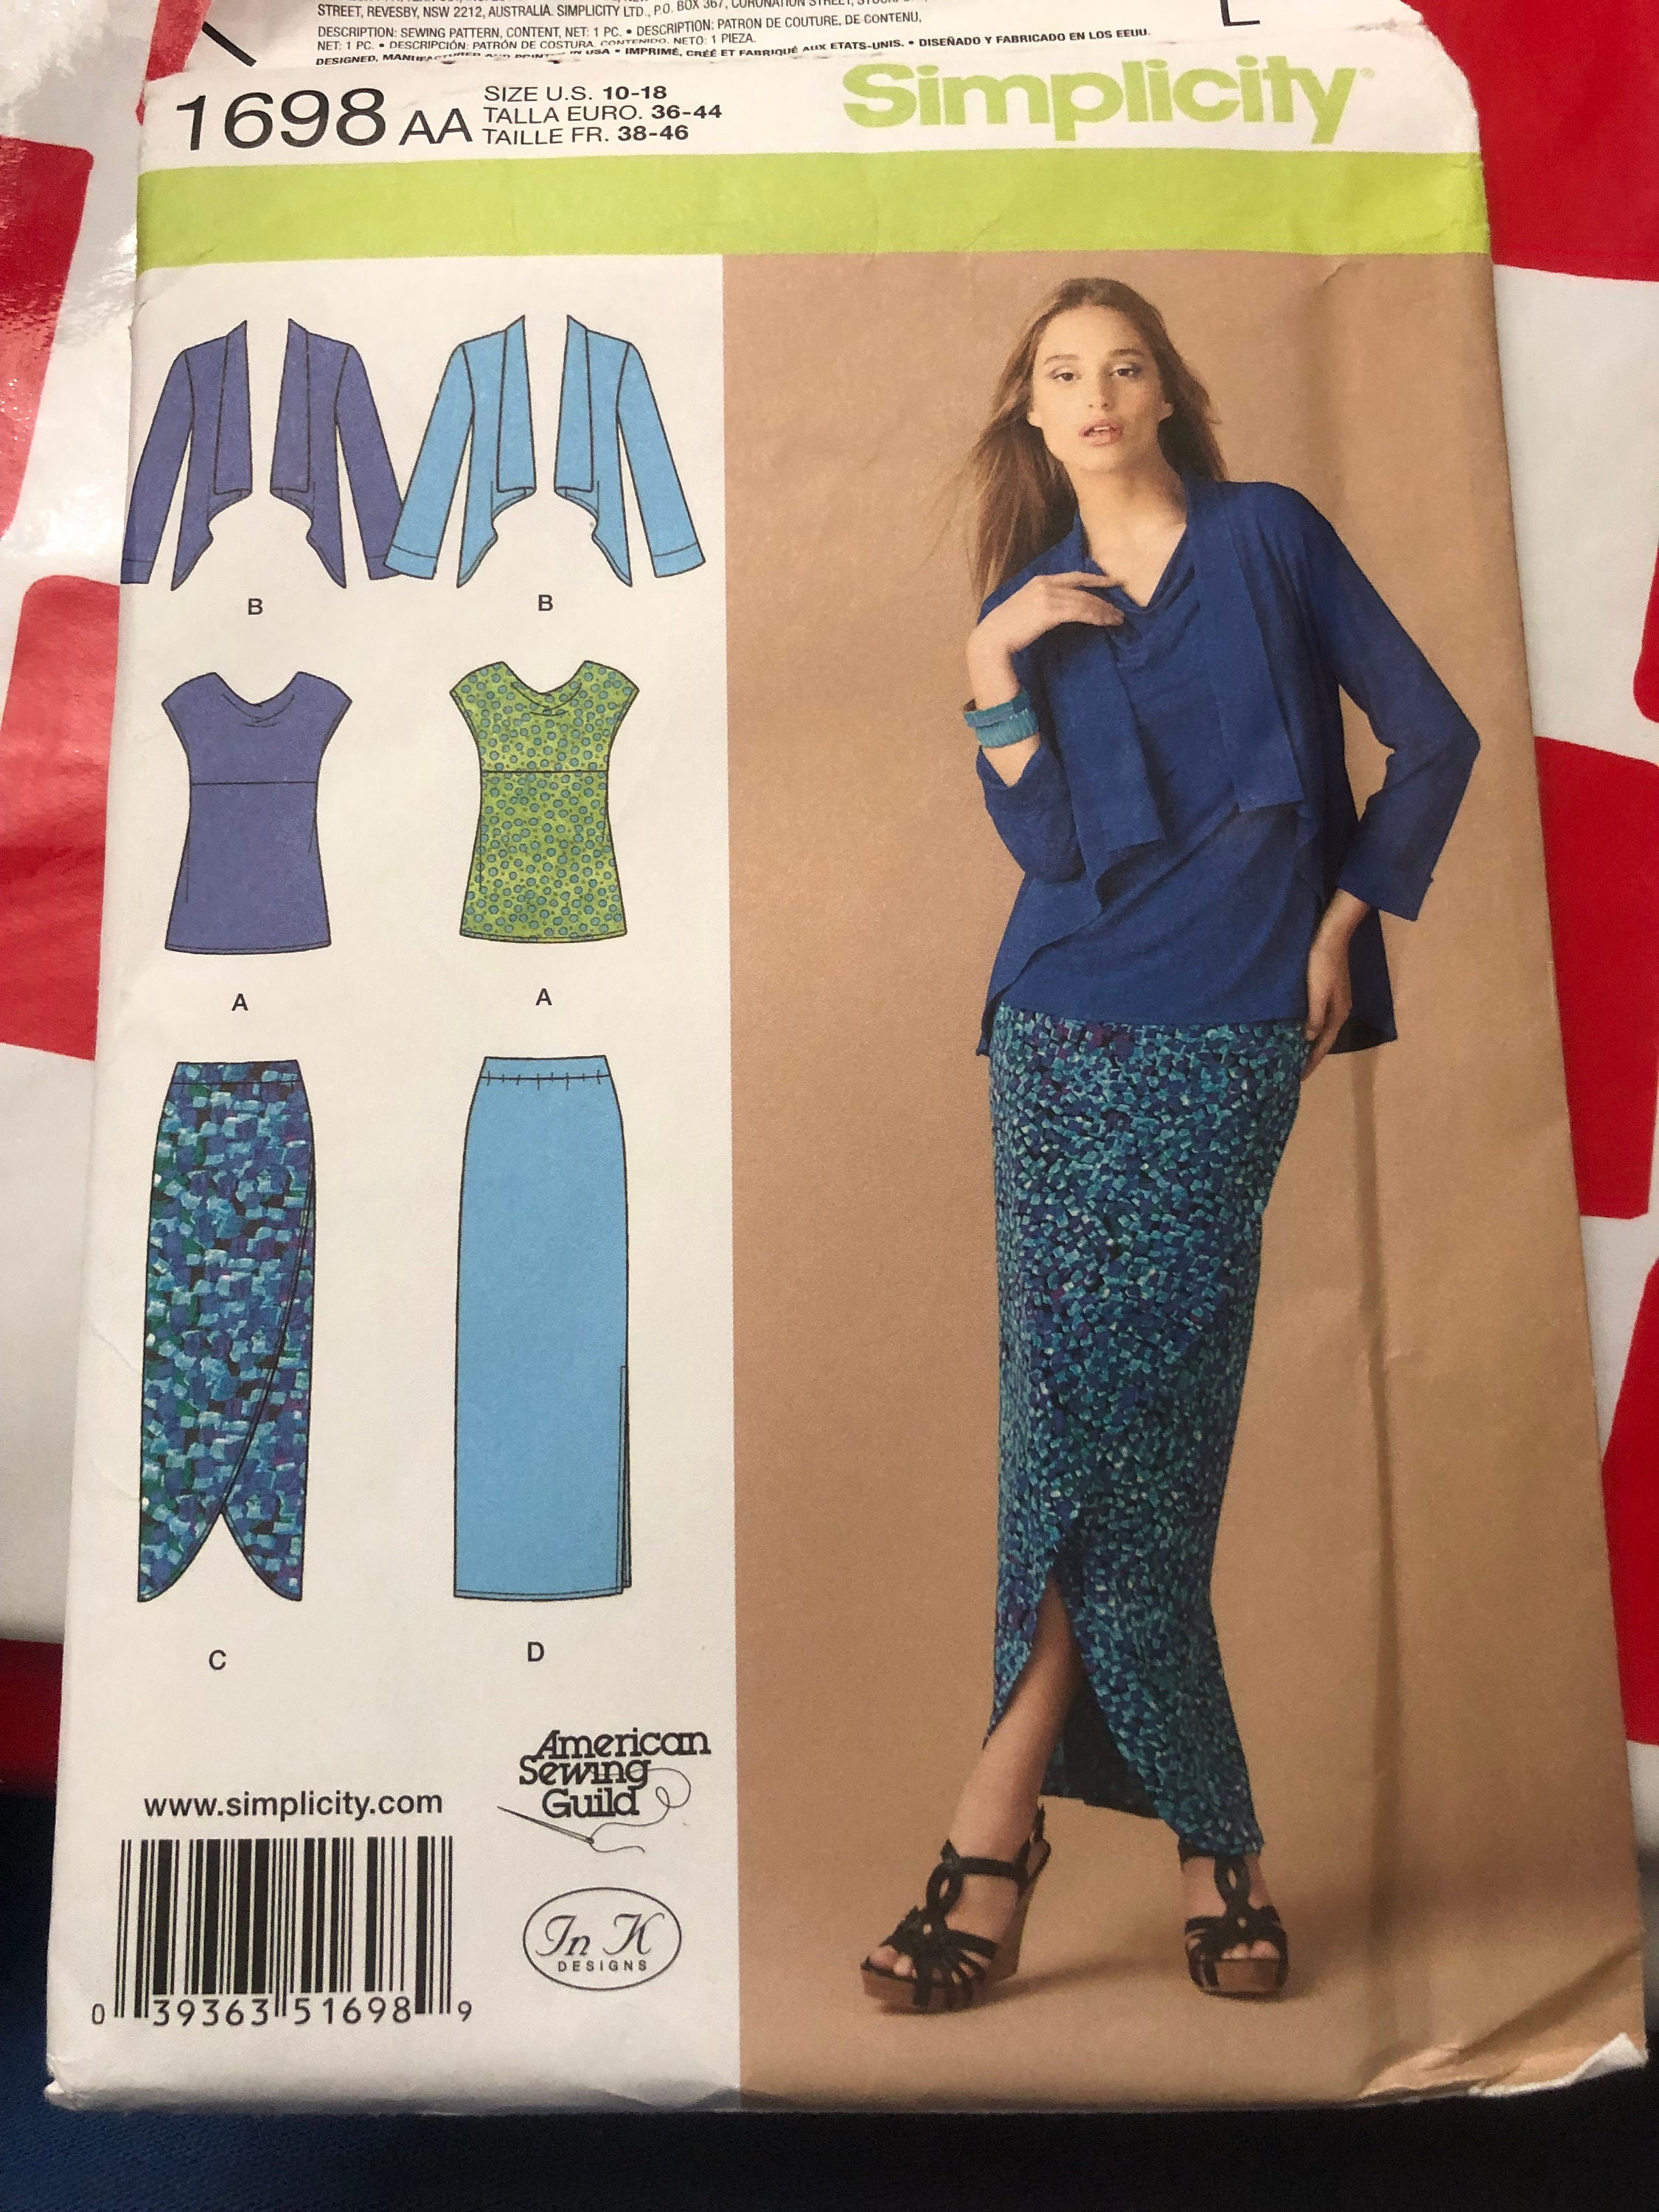 Simplicity 1698 Misses Knit Top, Jacket and Skirt Size 10-18 Uncut